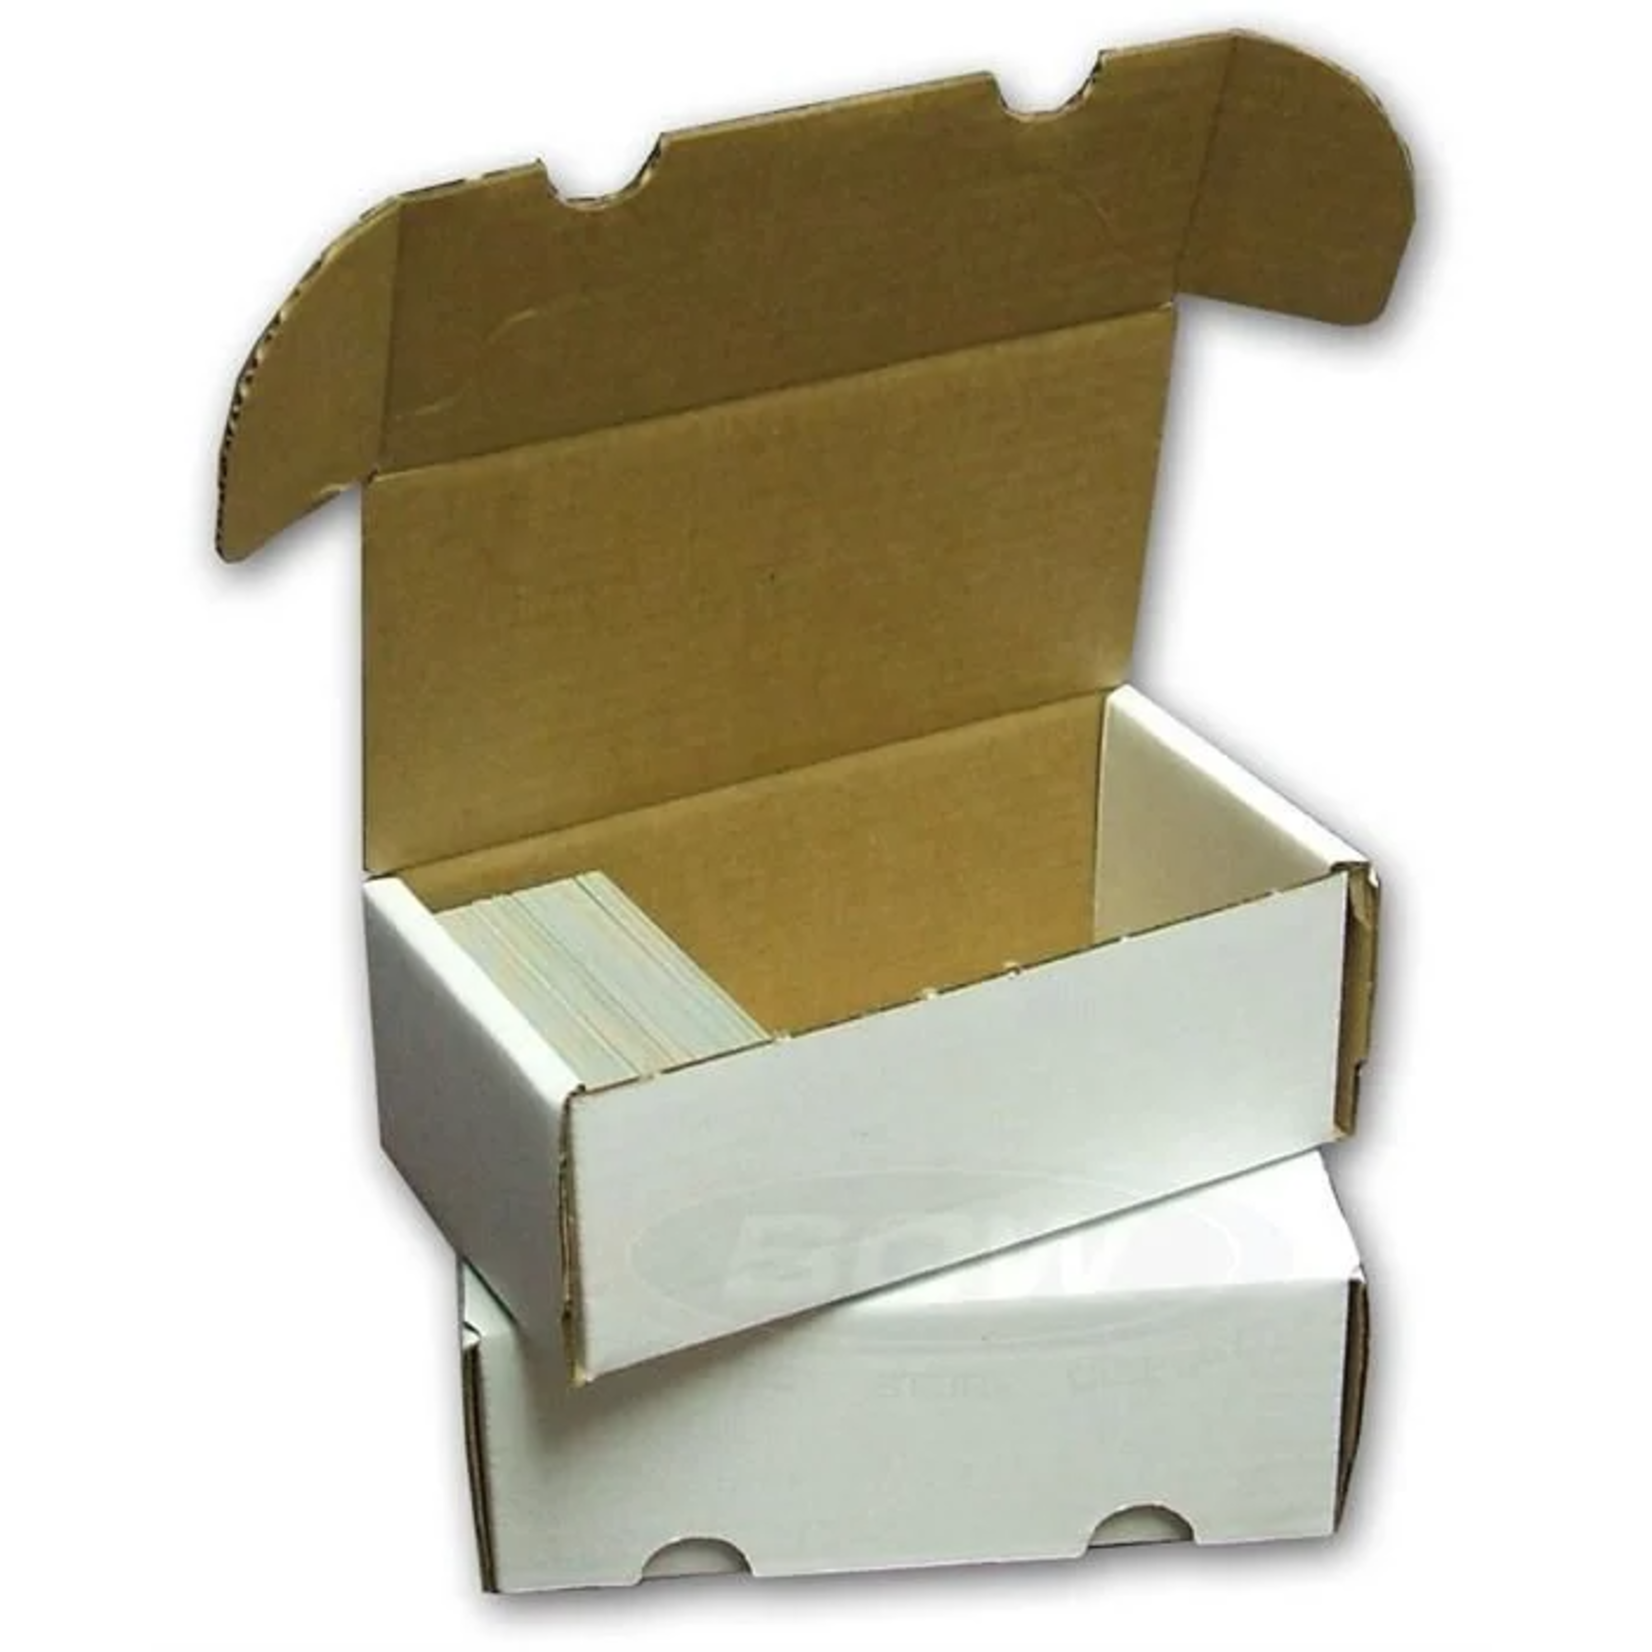 BCW 400 Count Storage Box (Fits 350 Standard Trading or 560 Collectible Cards)